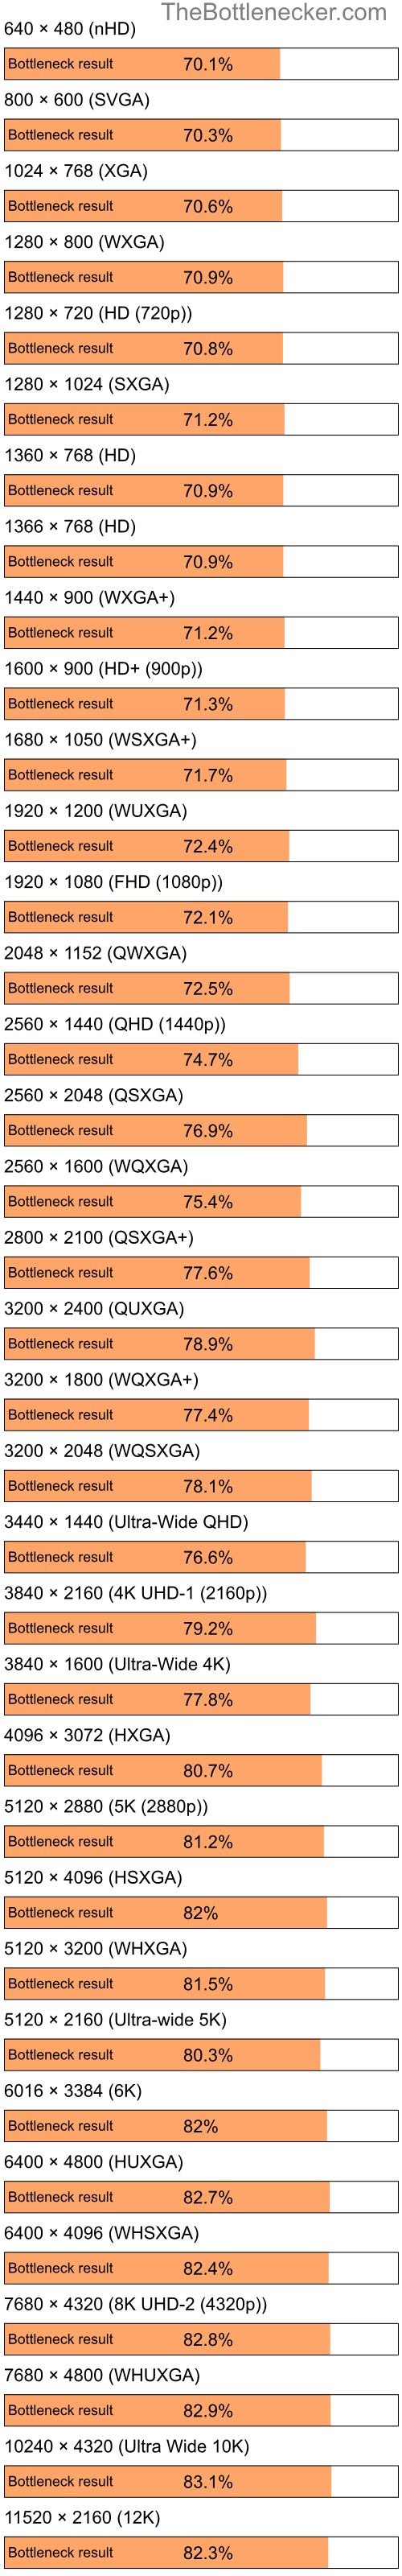 Bottleneck results by resolution for Intel Pentium 4 and AMD Radeon X1200 in Processor Intense Tasks